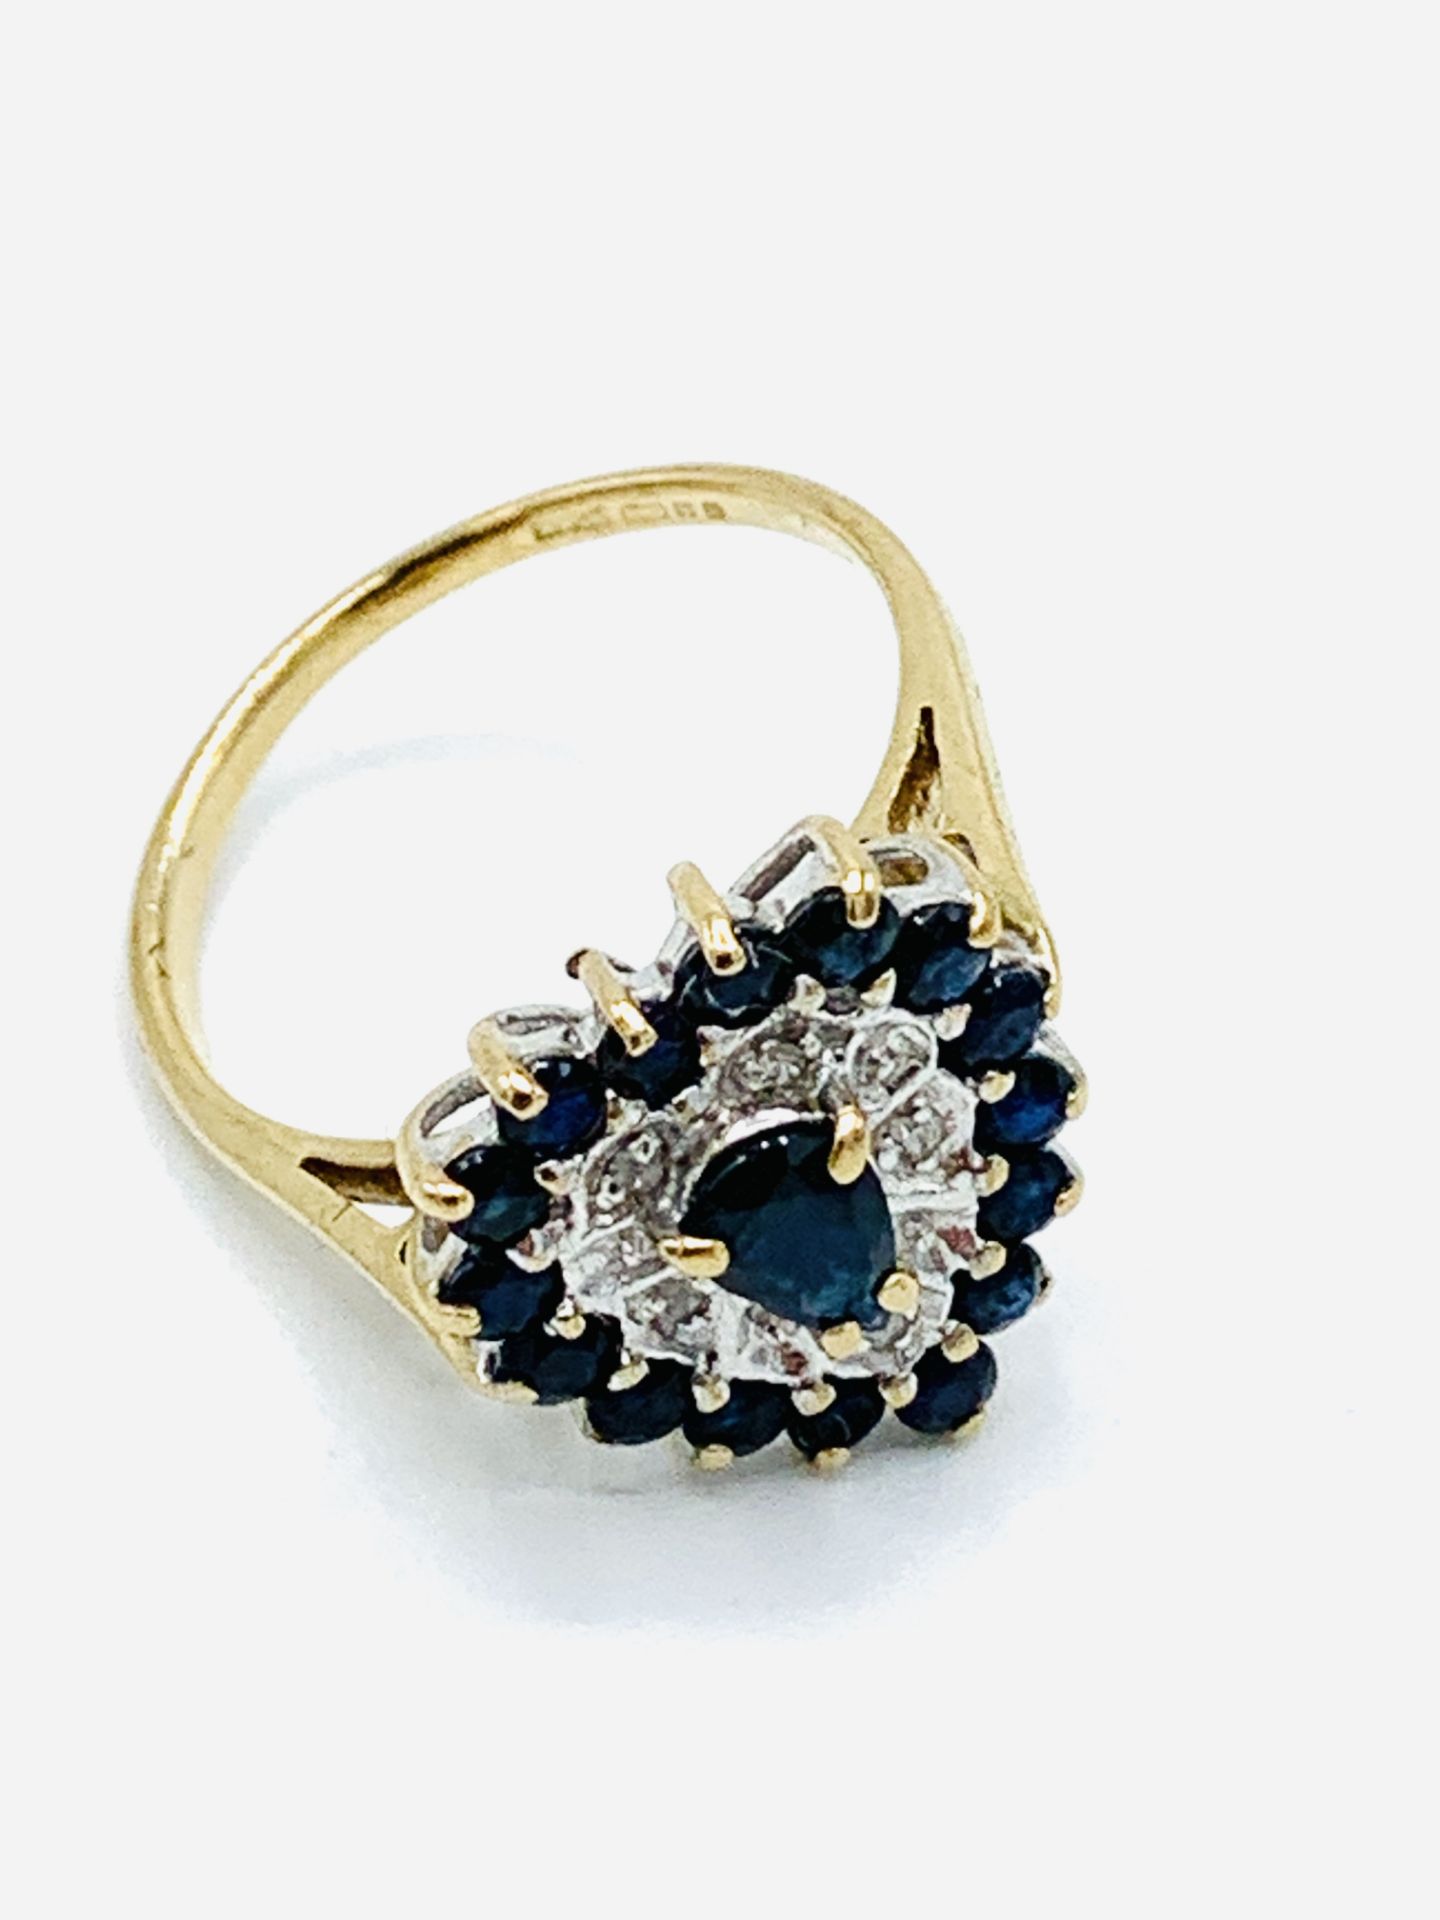 9ct gold heart shaped sapphire and diamond ring. - Image 3 of 4